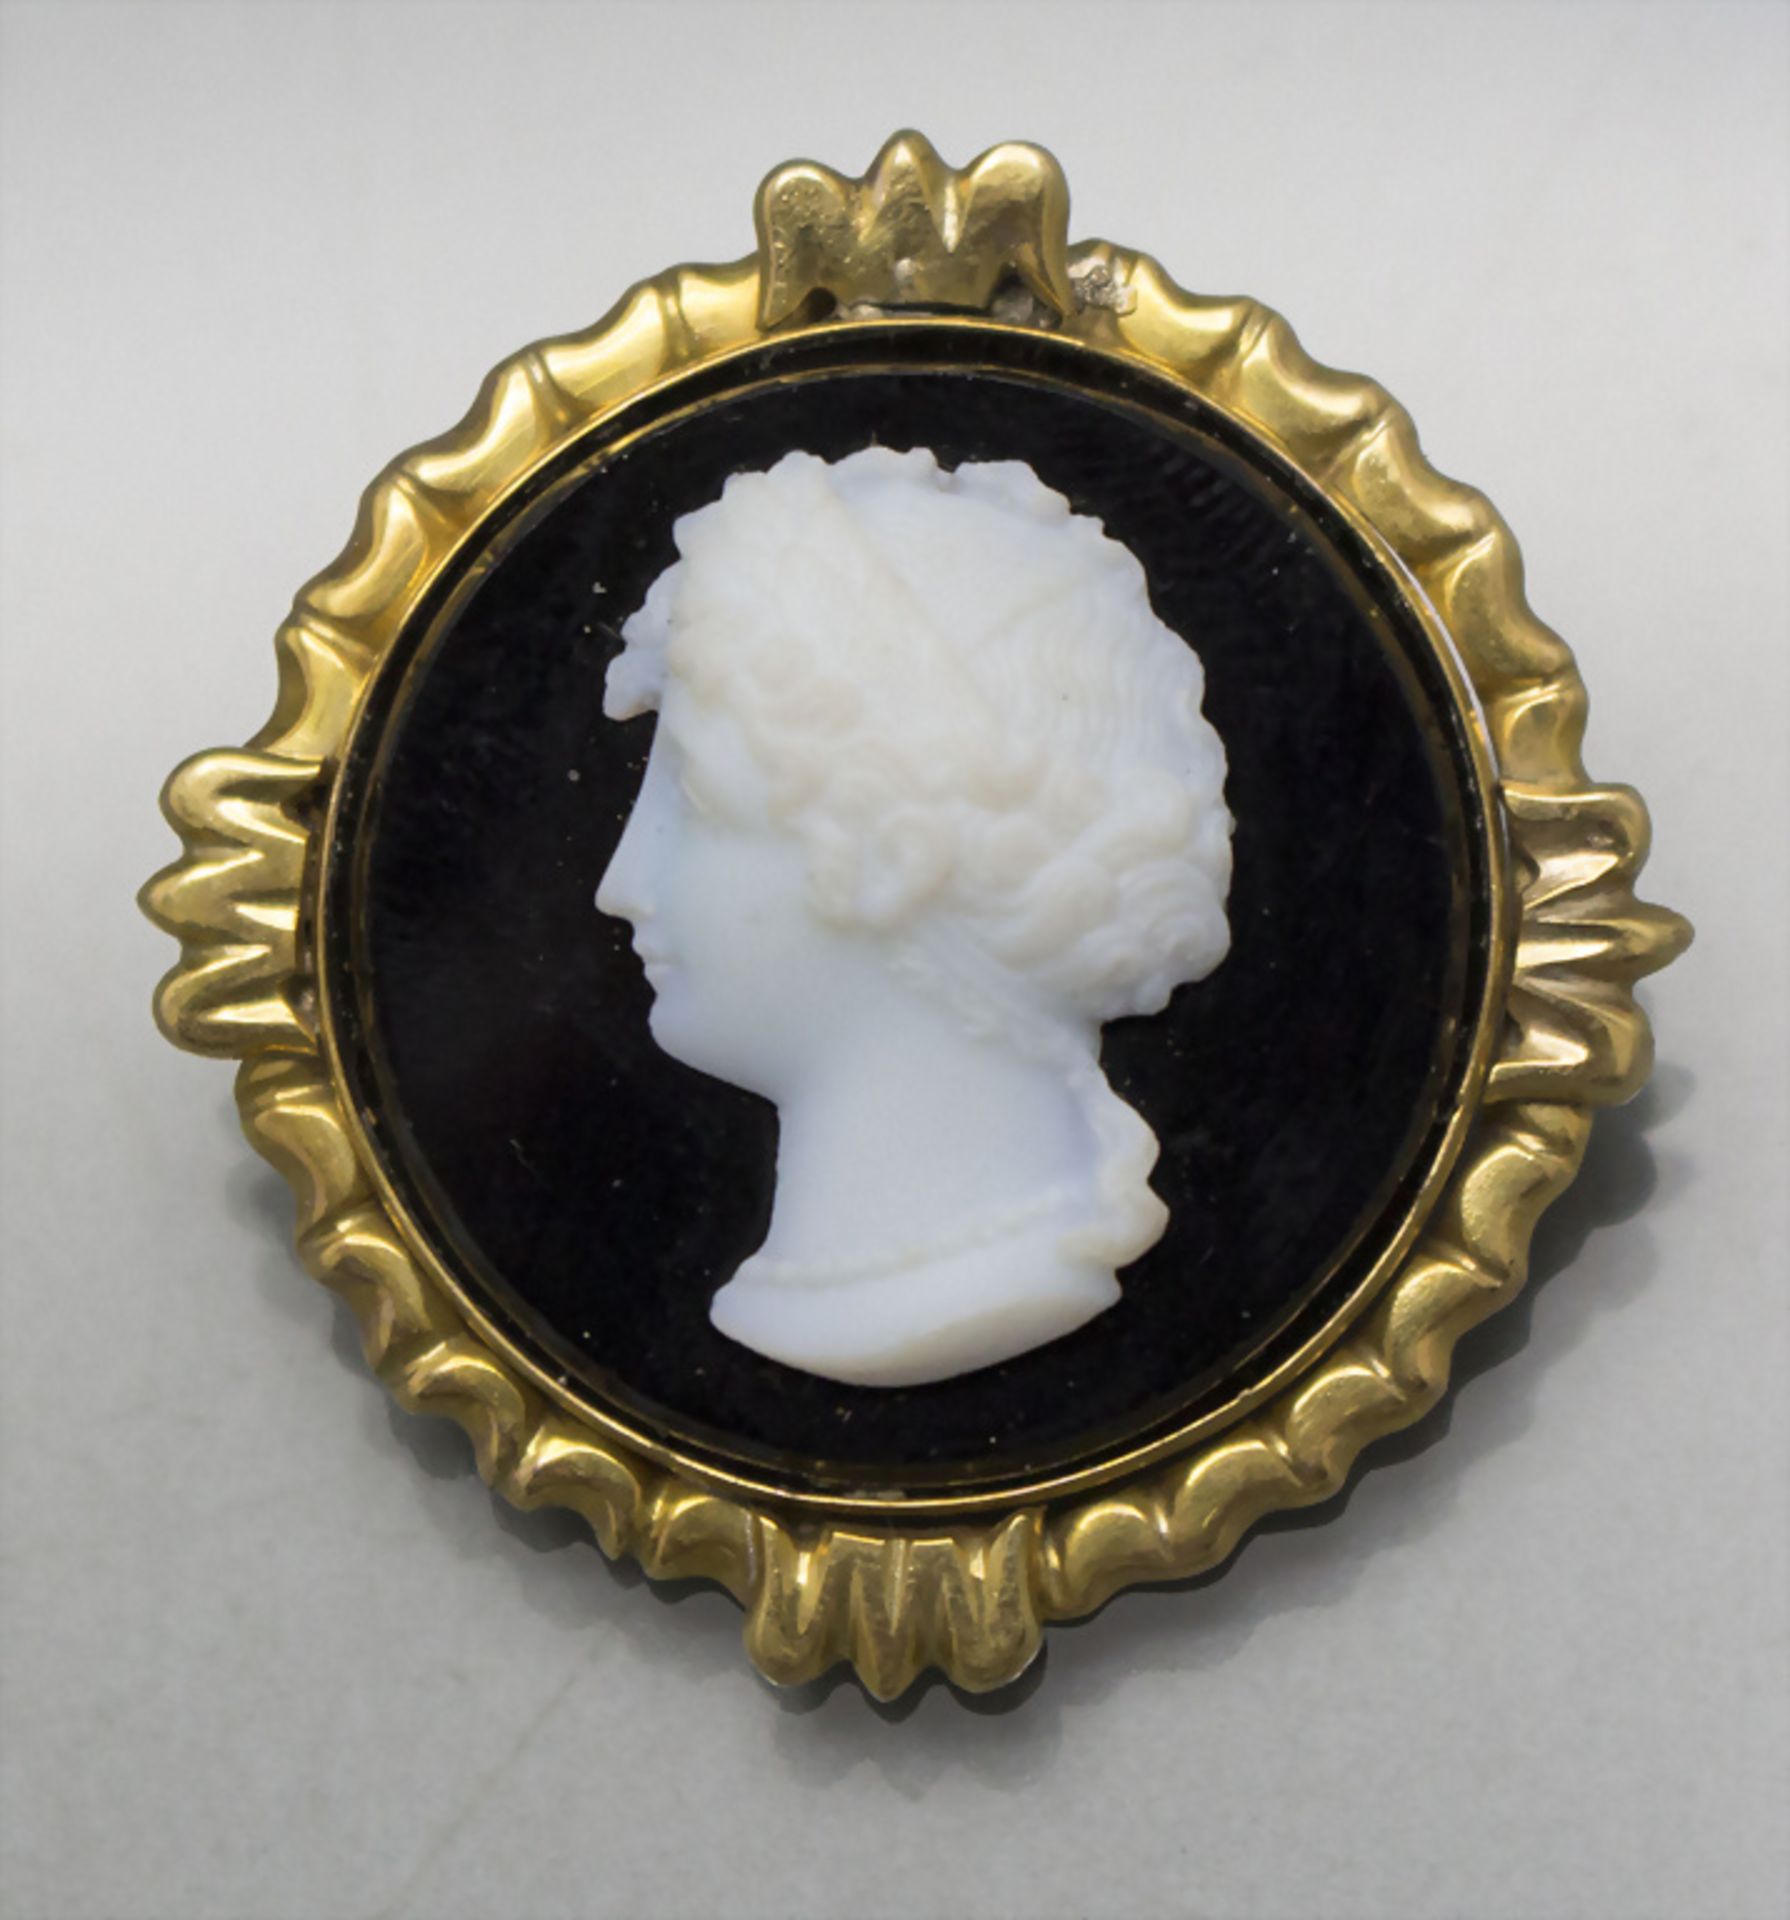 Kamee Brosche / A cameo brooch in a gold frame